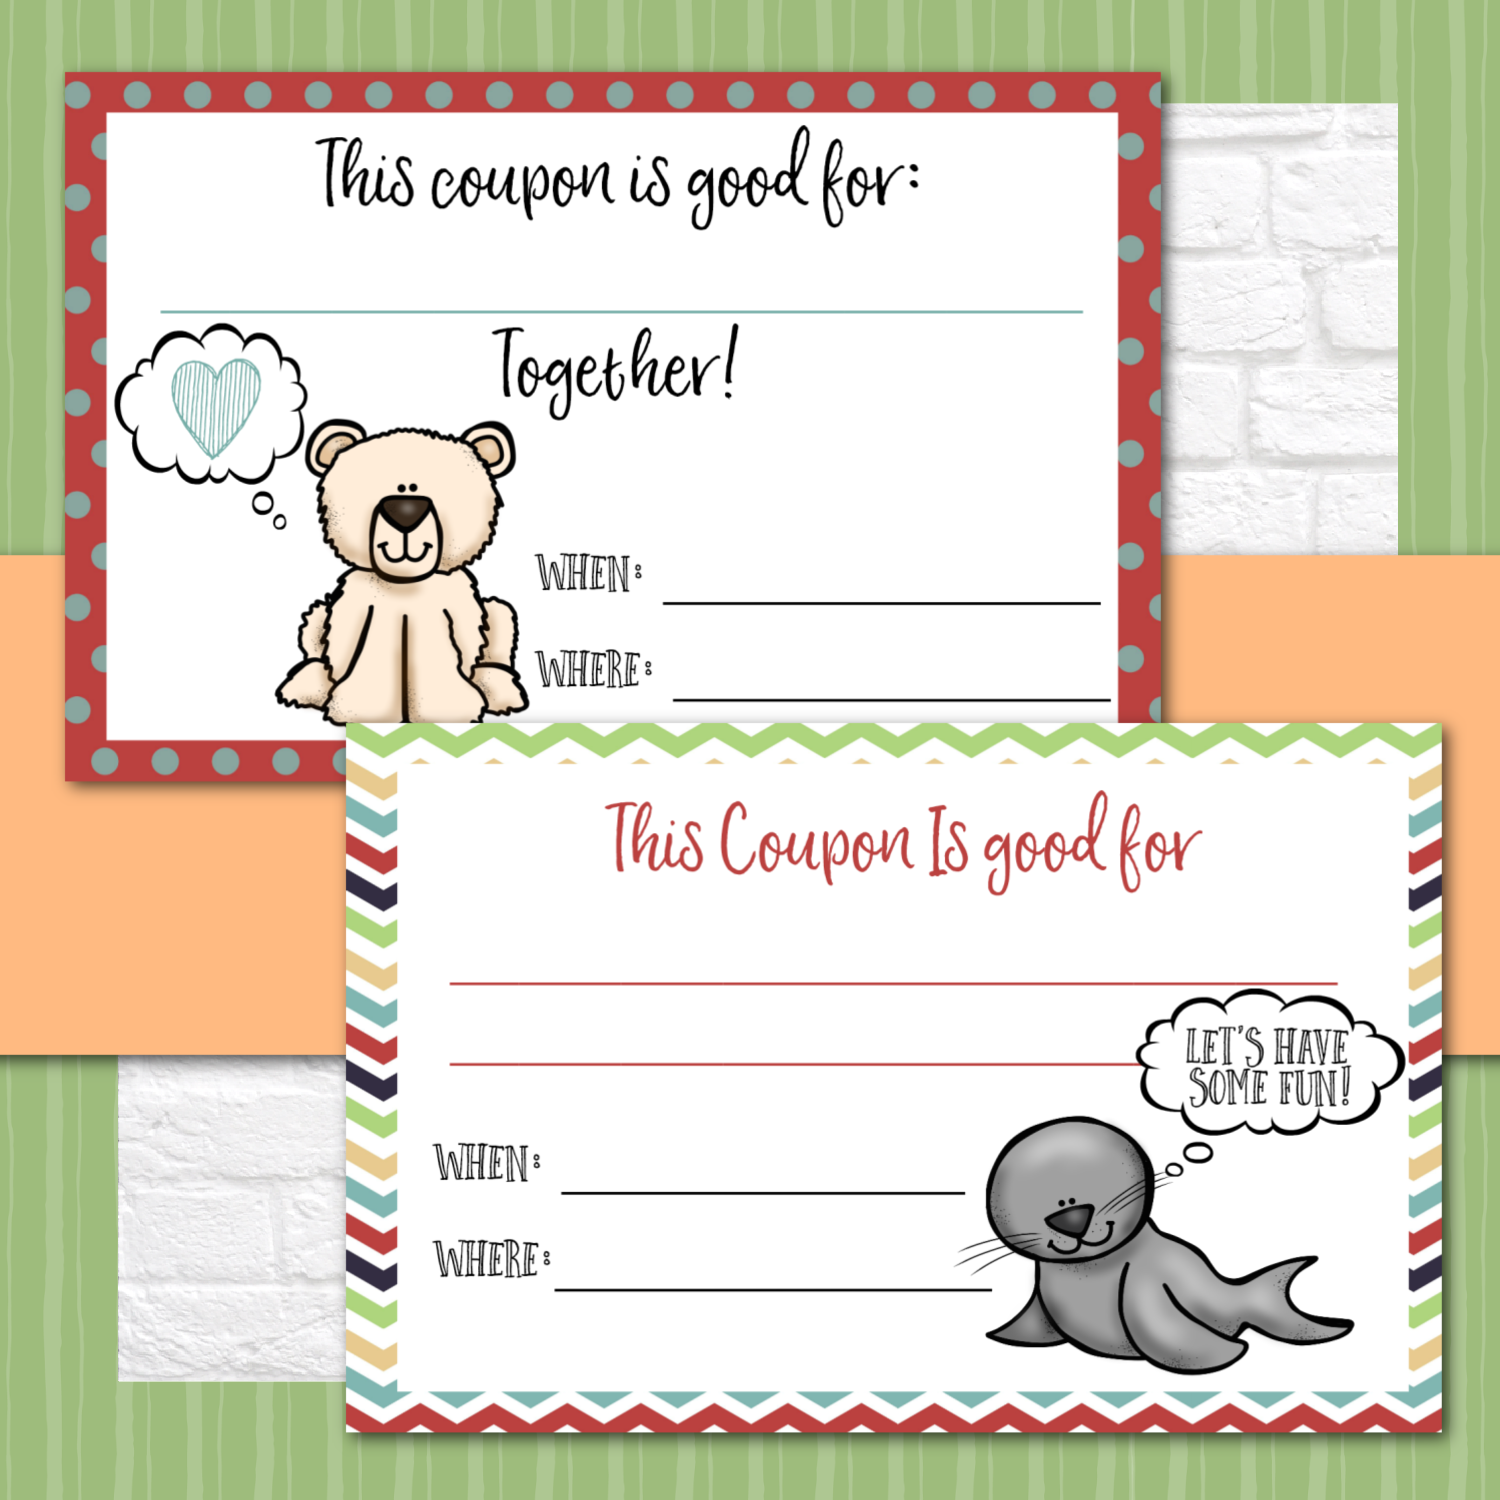 Love Coupons with Activities for the Family - 32 Relationship Building Cards